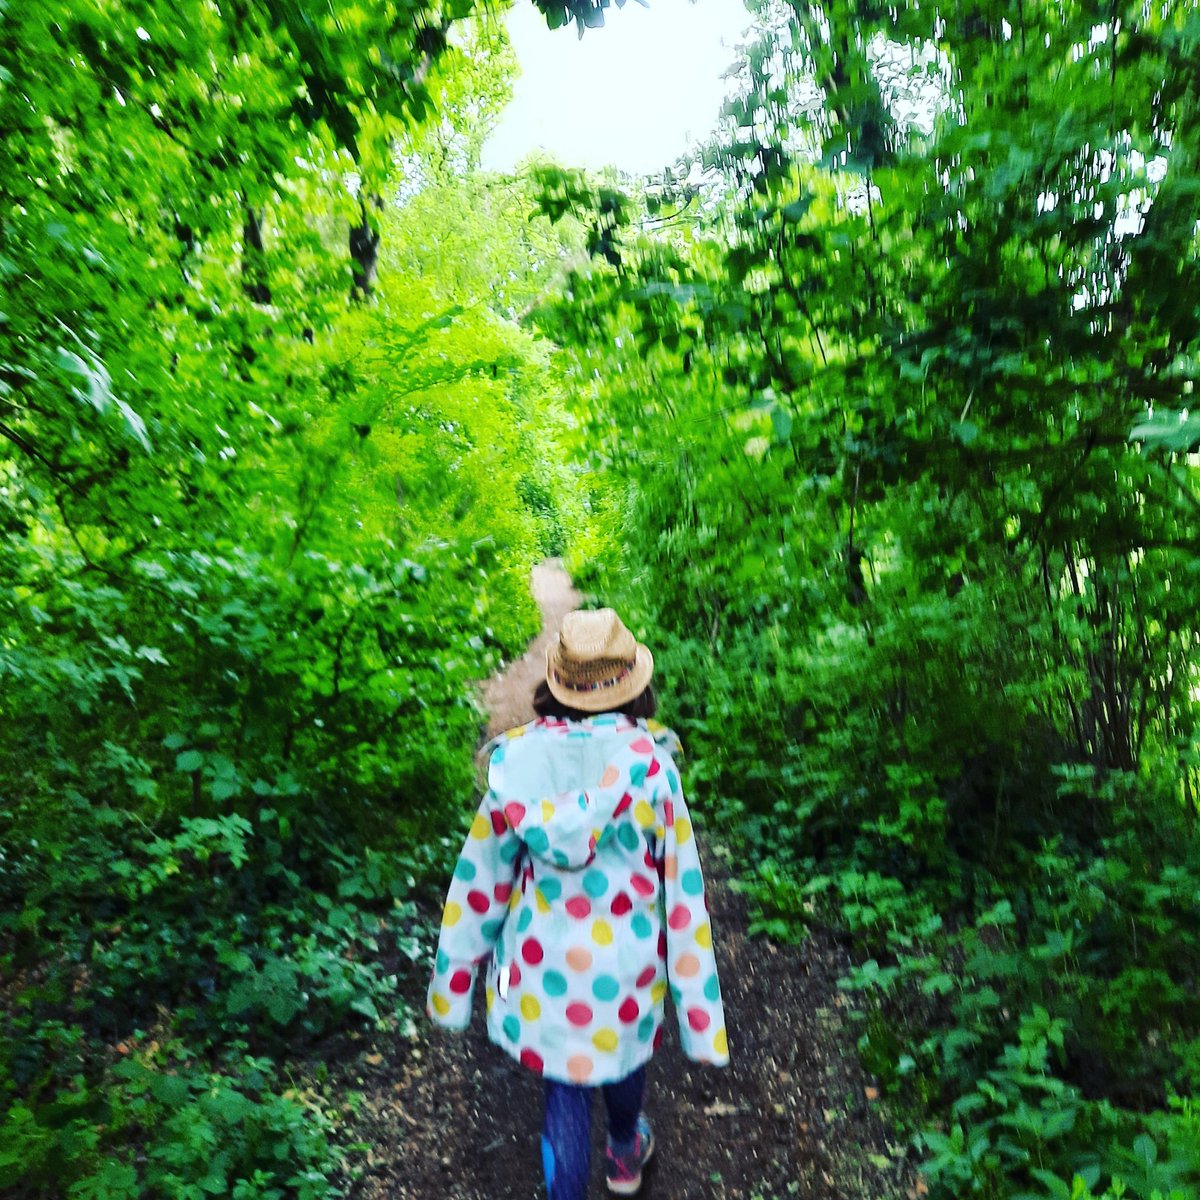 @readinglikemad on Instagram. New account with my daughter discussing  #ChildrensBooks give an enthusiastic young reader a follow! @scraphamster @tompalmerauthor @NosyCrow @penguinkids @MacmillanKidsUK @BarringtonStoke #childrenspublisher #childrensauthor #childrenslibrarian